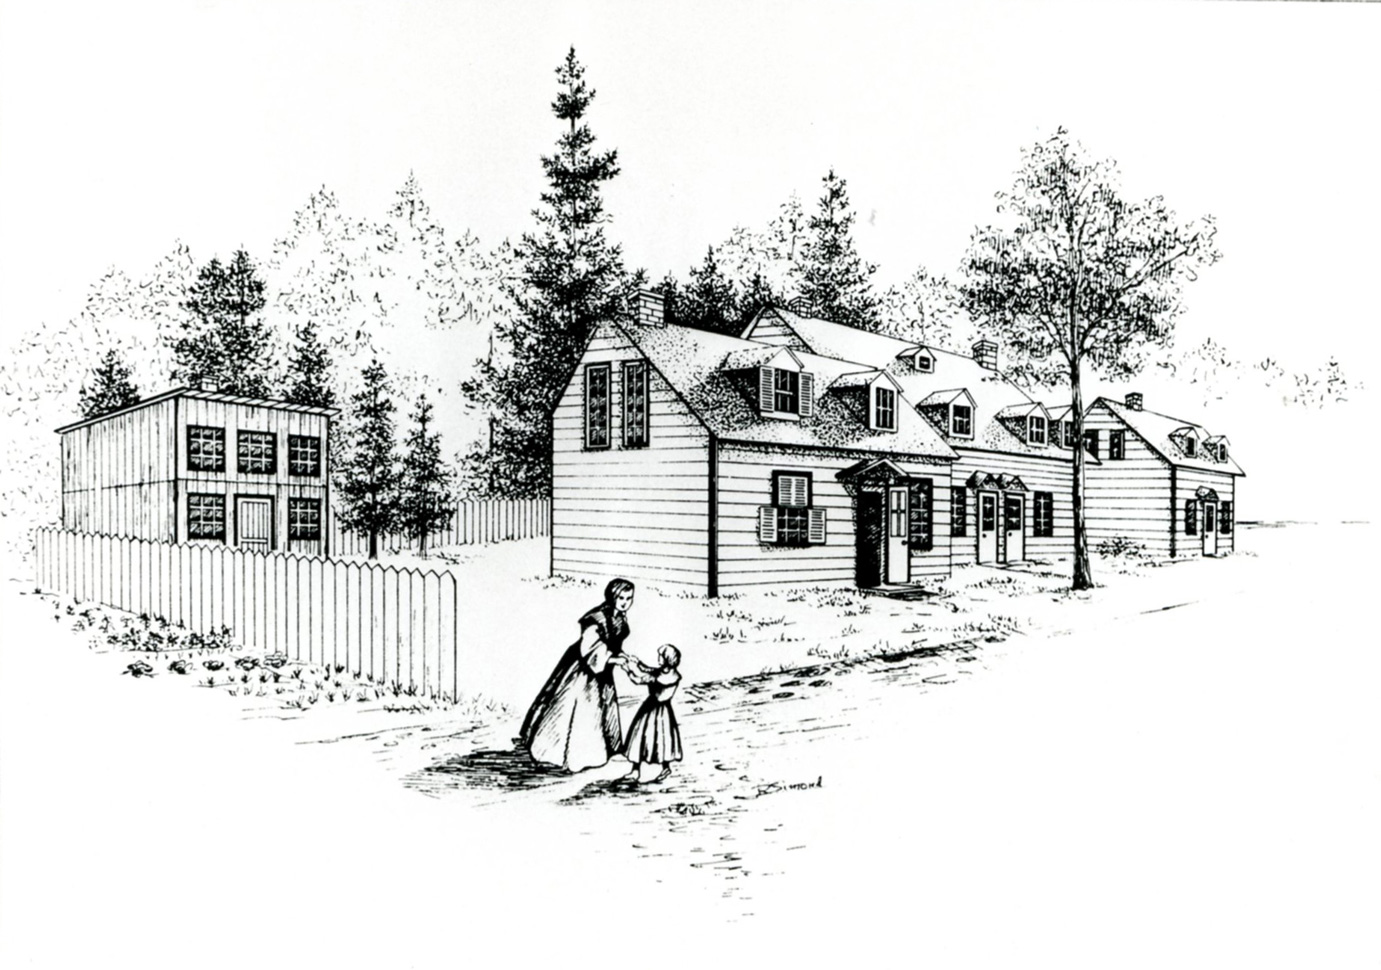 Nun in habit clasping arms with female child in a dress, three wooden buildings with gabled windows and trees in background.